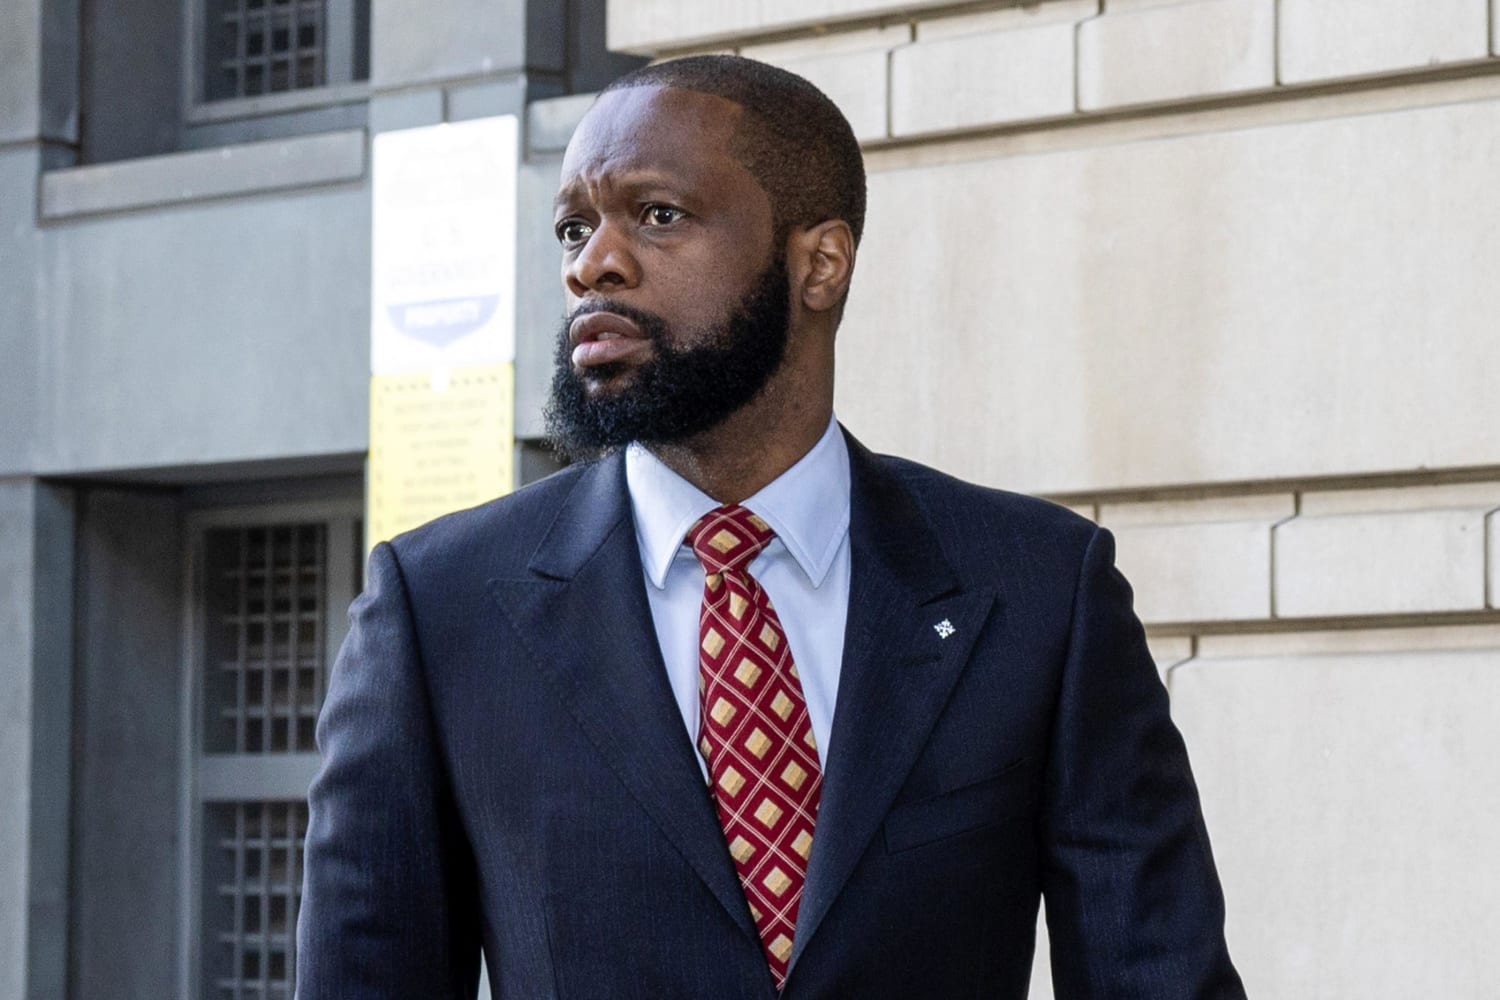 Former Fugees member Pras Michel convicted on 10 felony counts in conspiracy trial